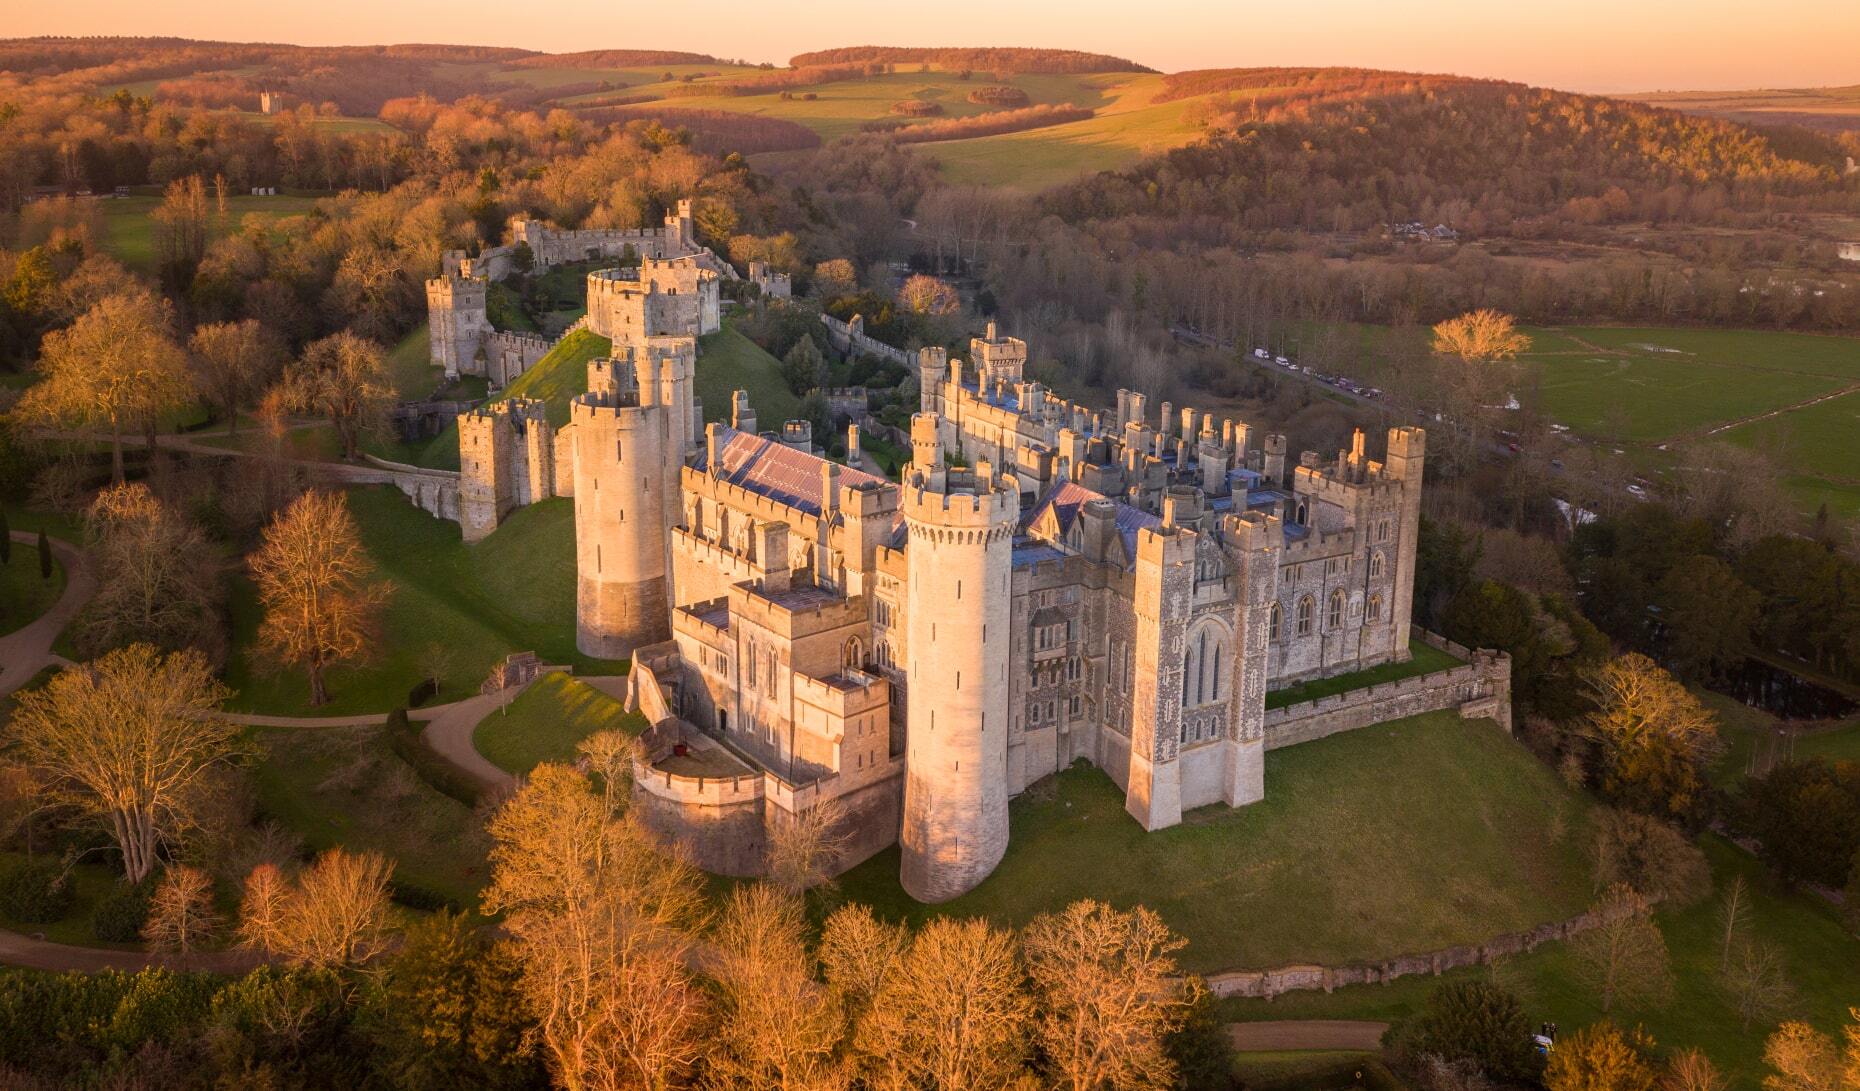 <p>Founded in the 11th century by Roger de Montgomery, <a href="https://www.arundelcastle.org/" class="atom_link atom_valid" rel="noreferrer noopener">Arundel Castle</a> was almost completely rebuilt in the late 19th century. Thanks to its incredible Gothic architecture, it is considered one of the most beautiful works of the Victorian era. If you visit Arundel Castle, you’ll also get to see an impressive collection of artworks and take a stroll through its beautiful gardens, where you can catch medieval re-enactments during the summer.</p>